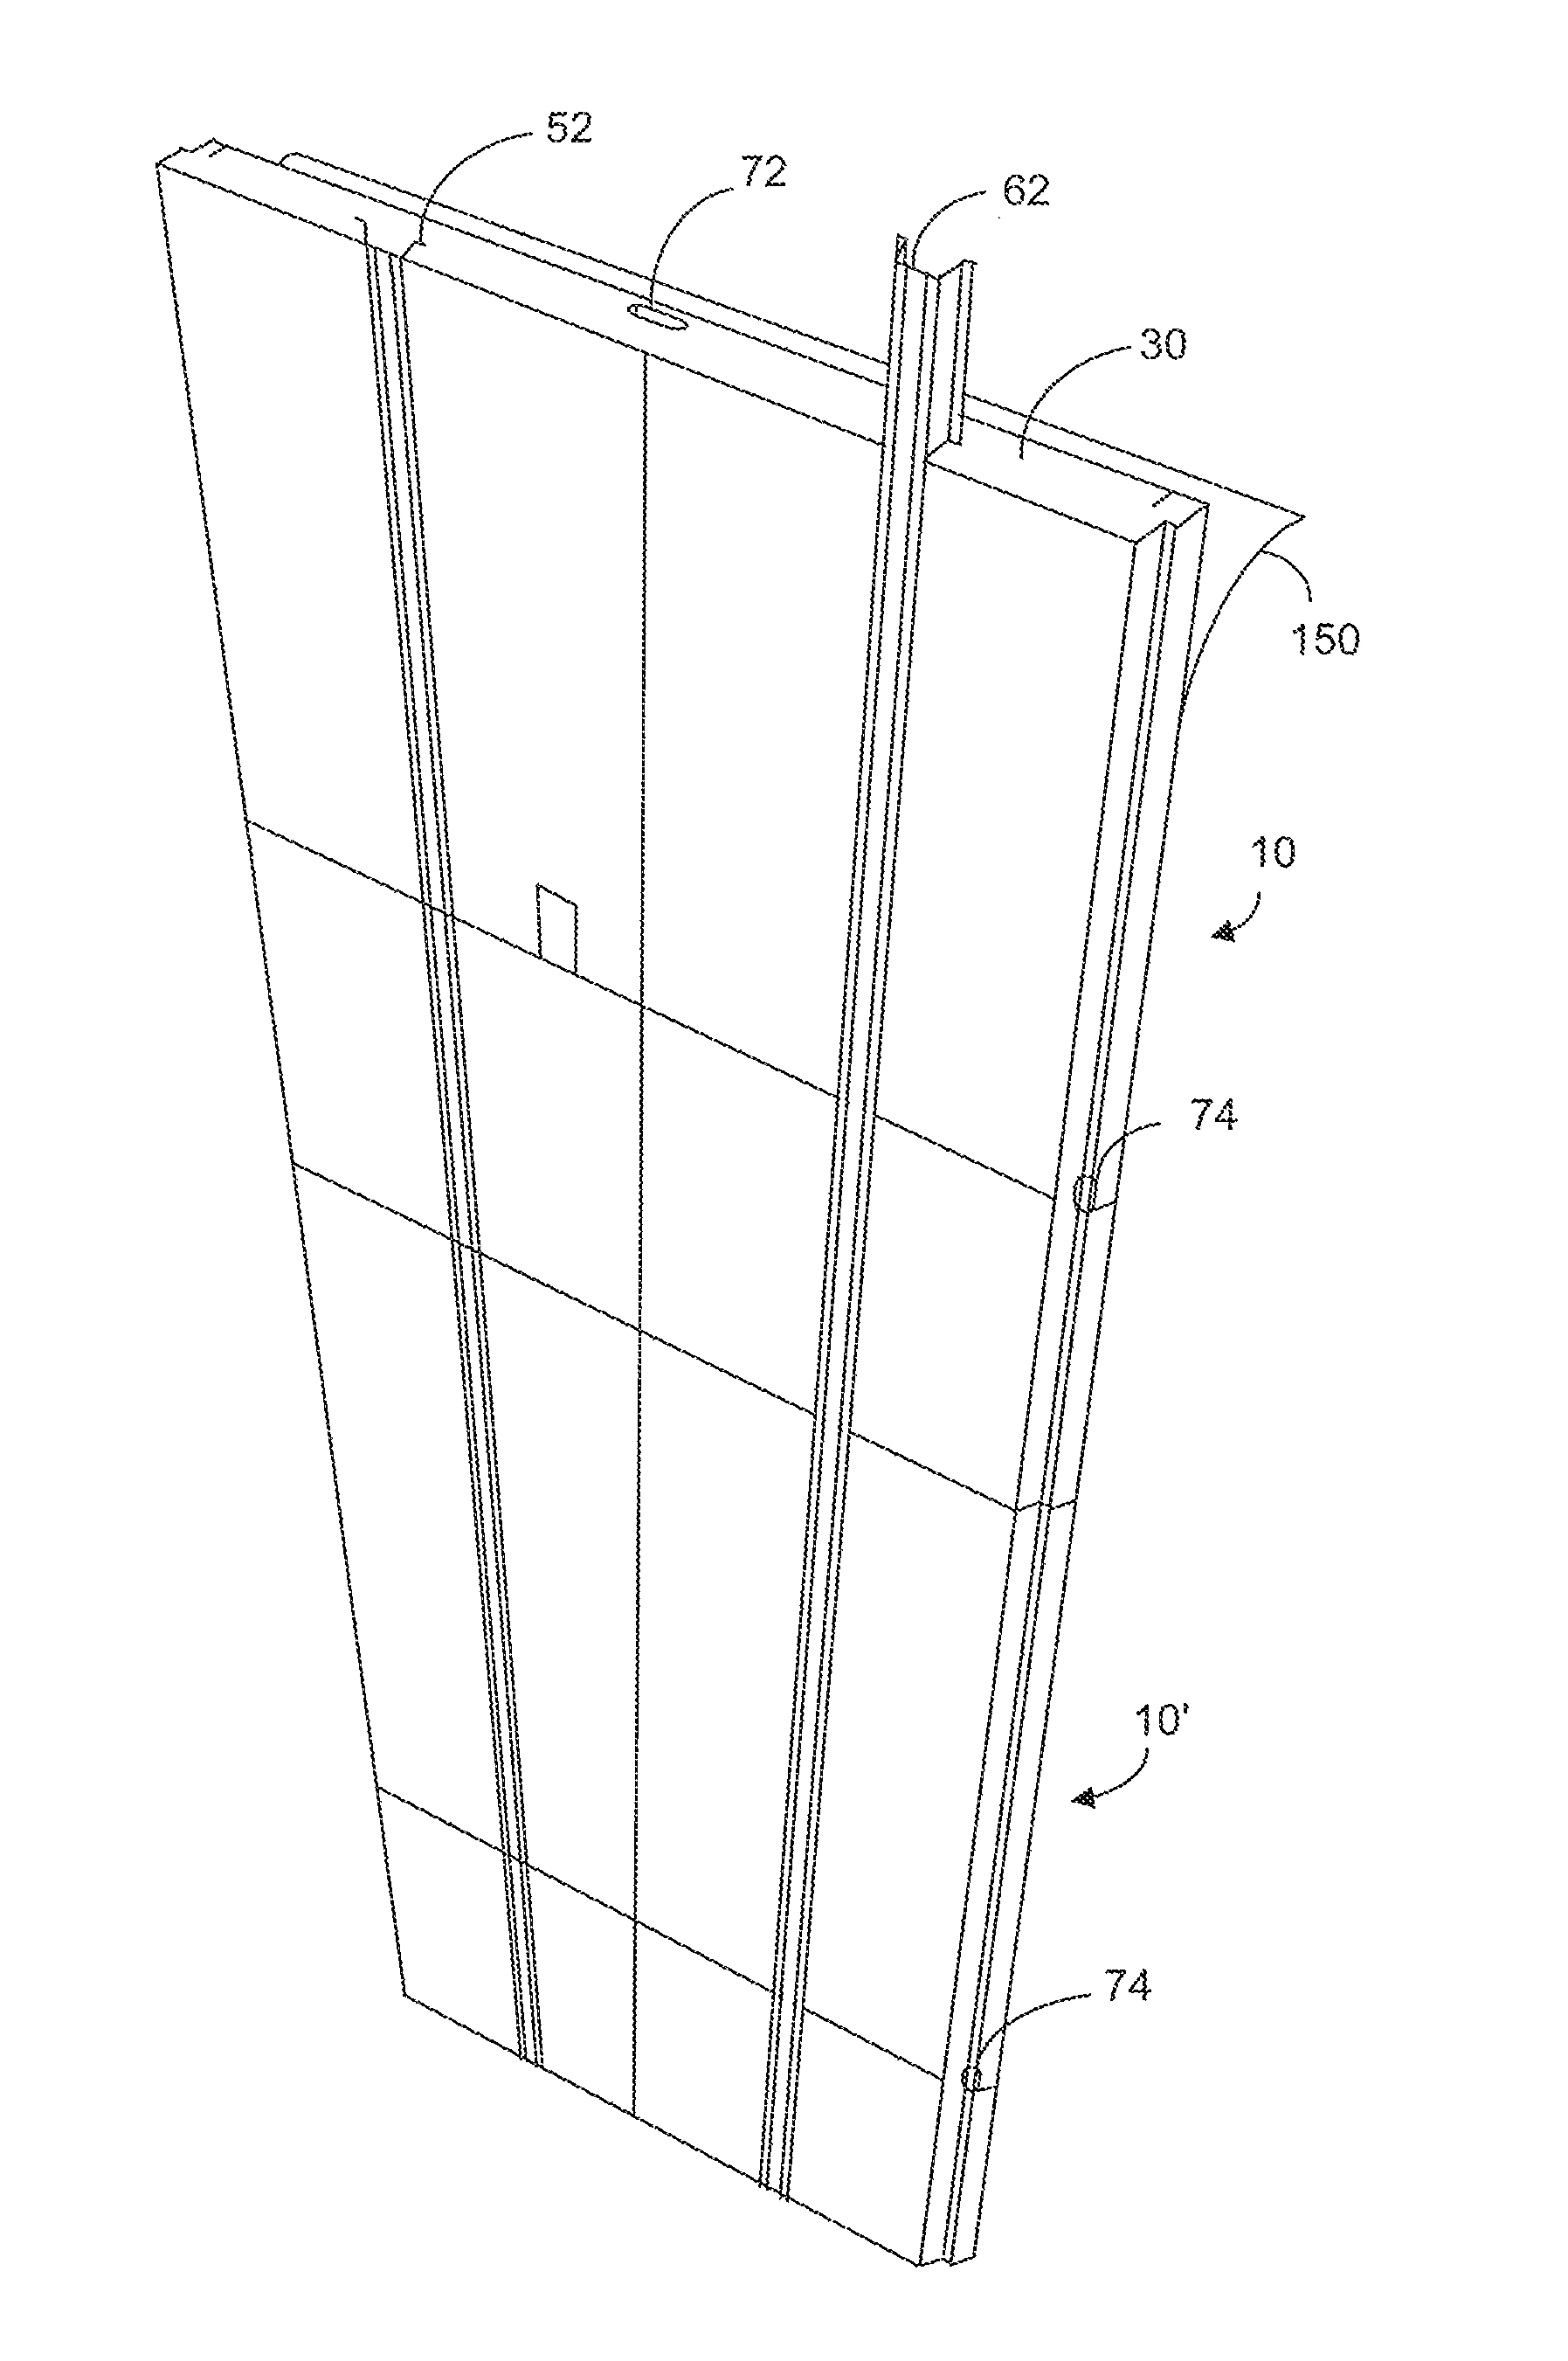 Insulating wall panel with electrical wire chase system